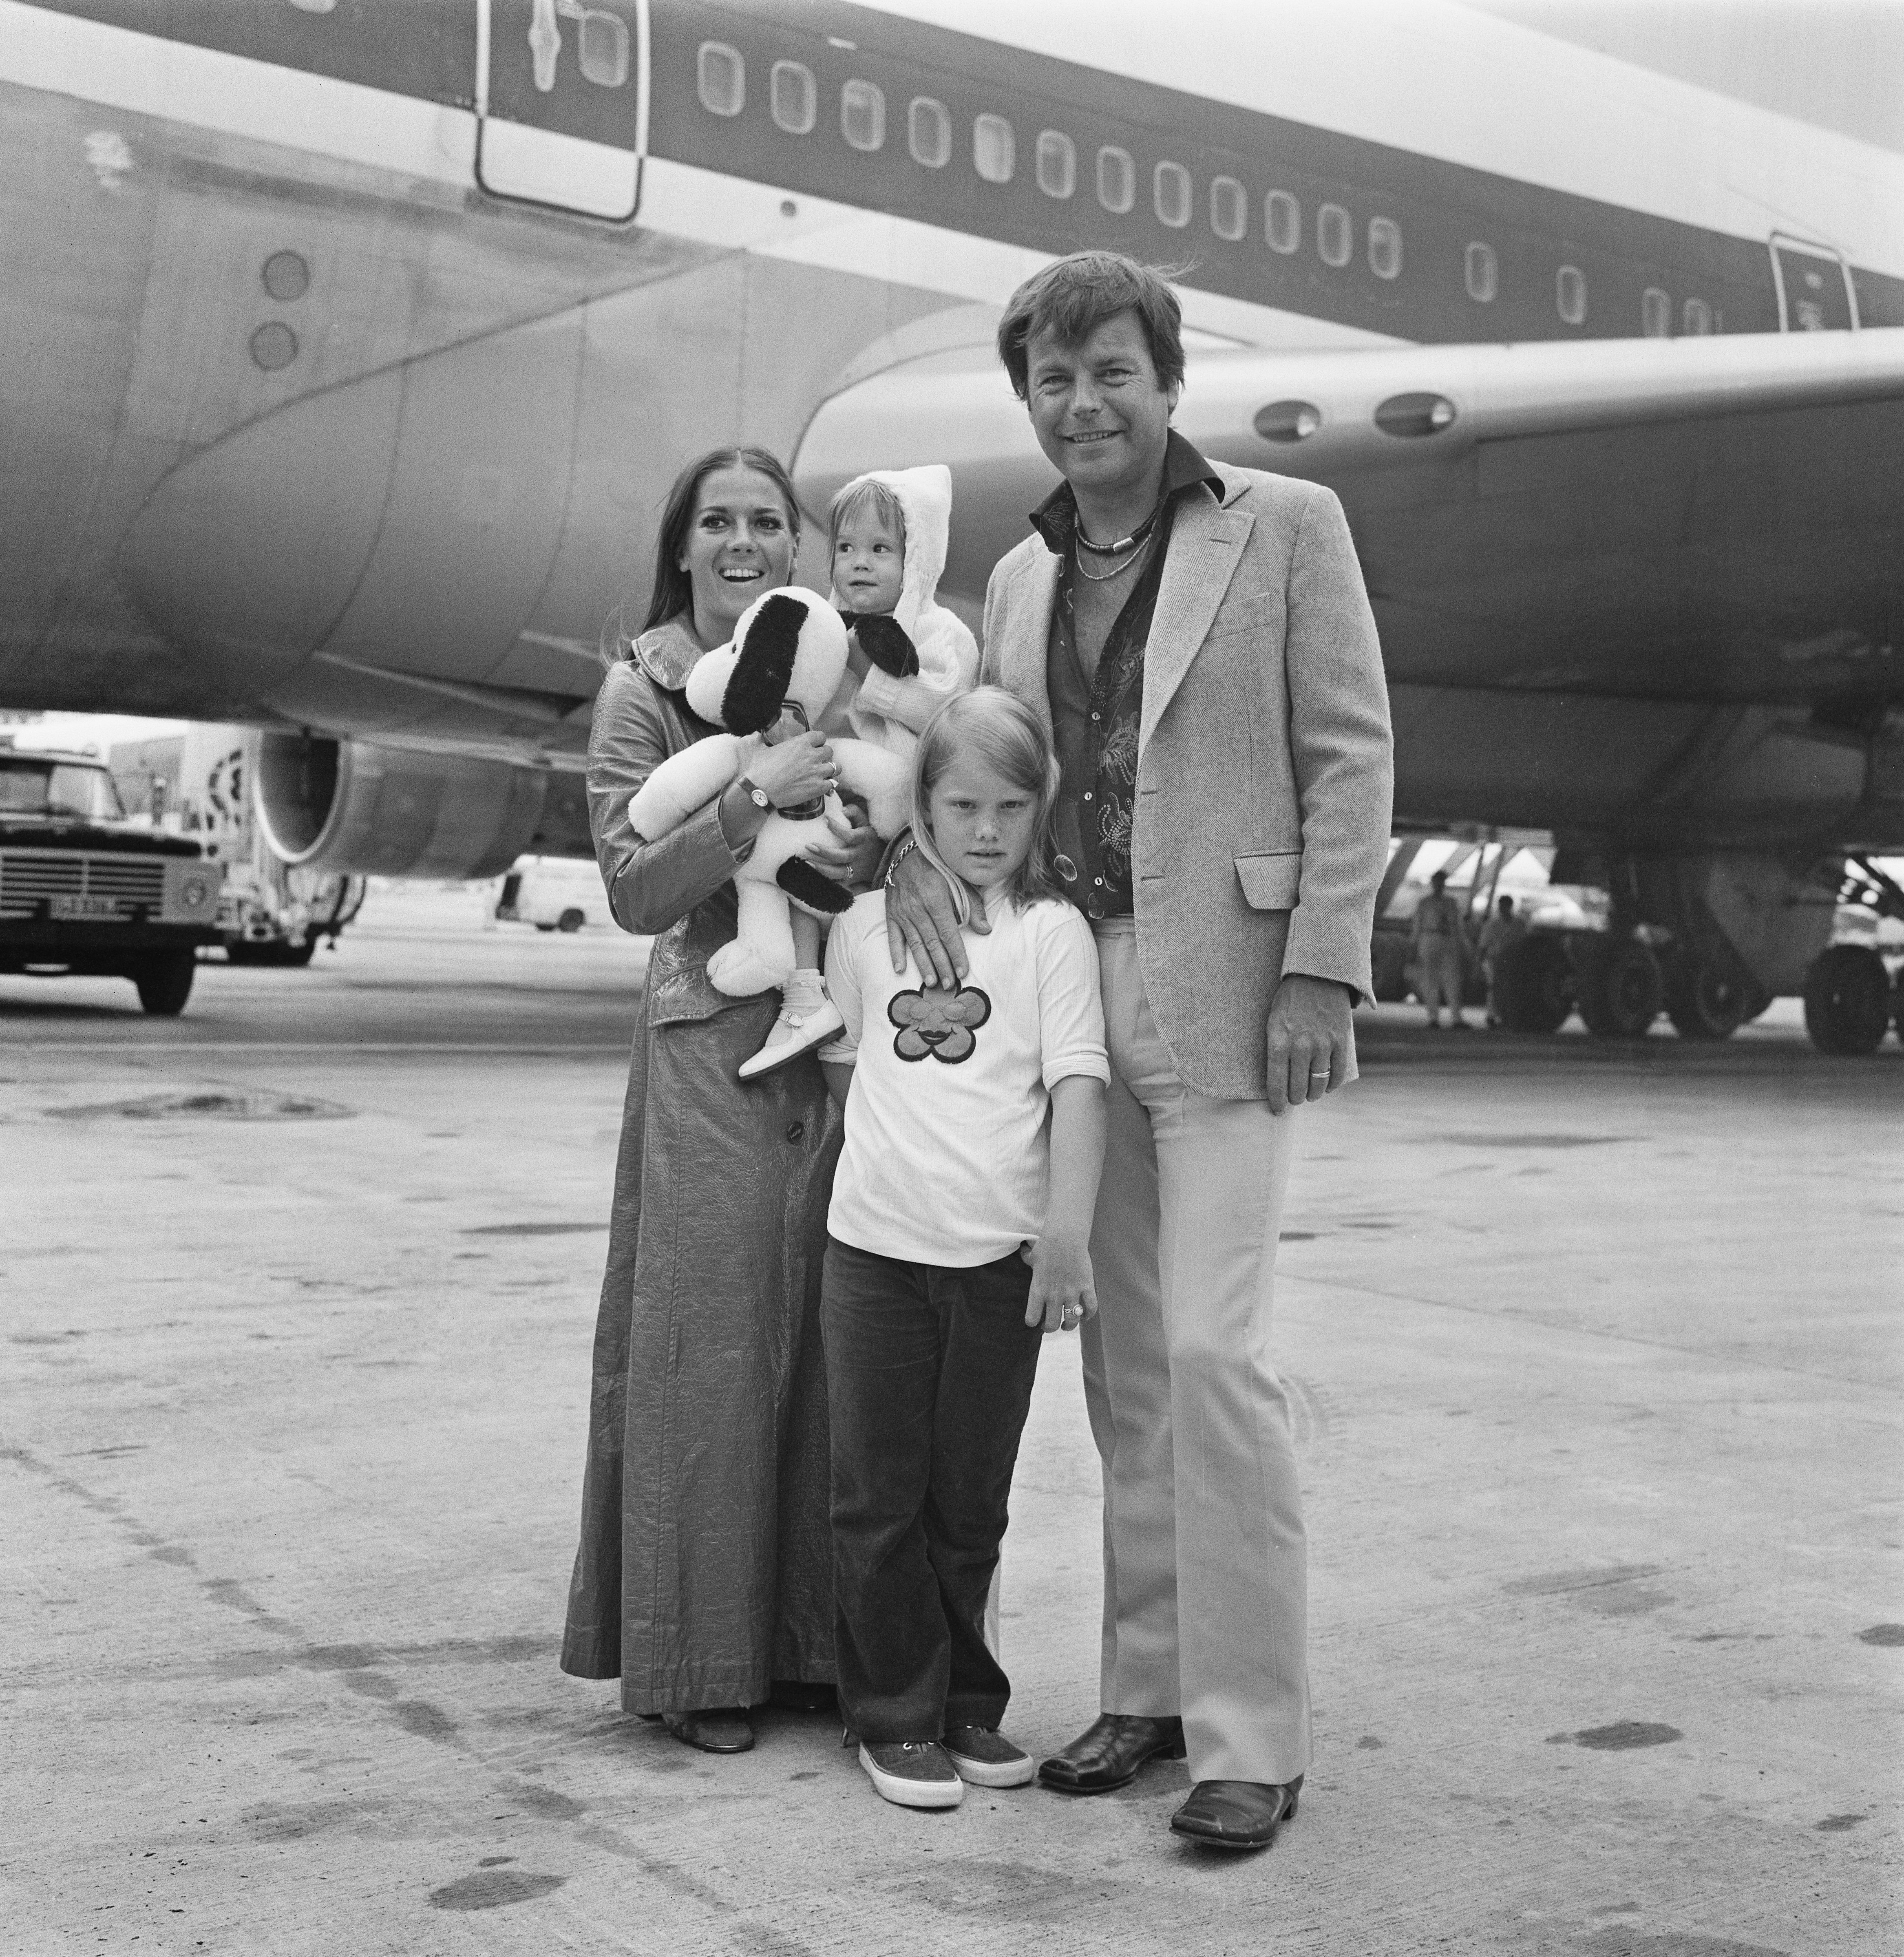 Actress Natalie Wood and her husband, actor Robert Wagner, with her daughter Natasha and his daughter Katie at Heathrow Airport on August 4, 1972 in London, United Kingdom ┃Source: Getty Images